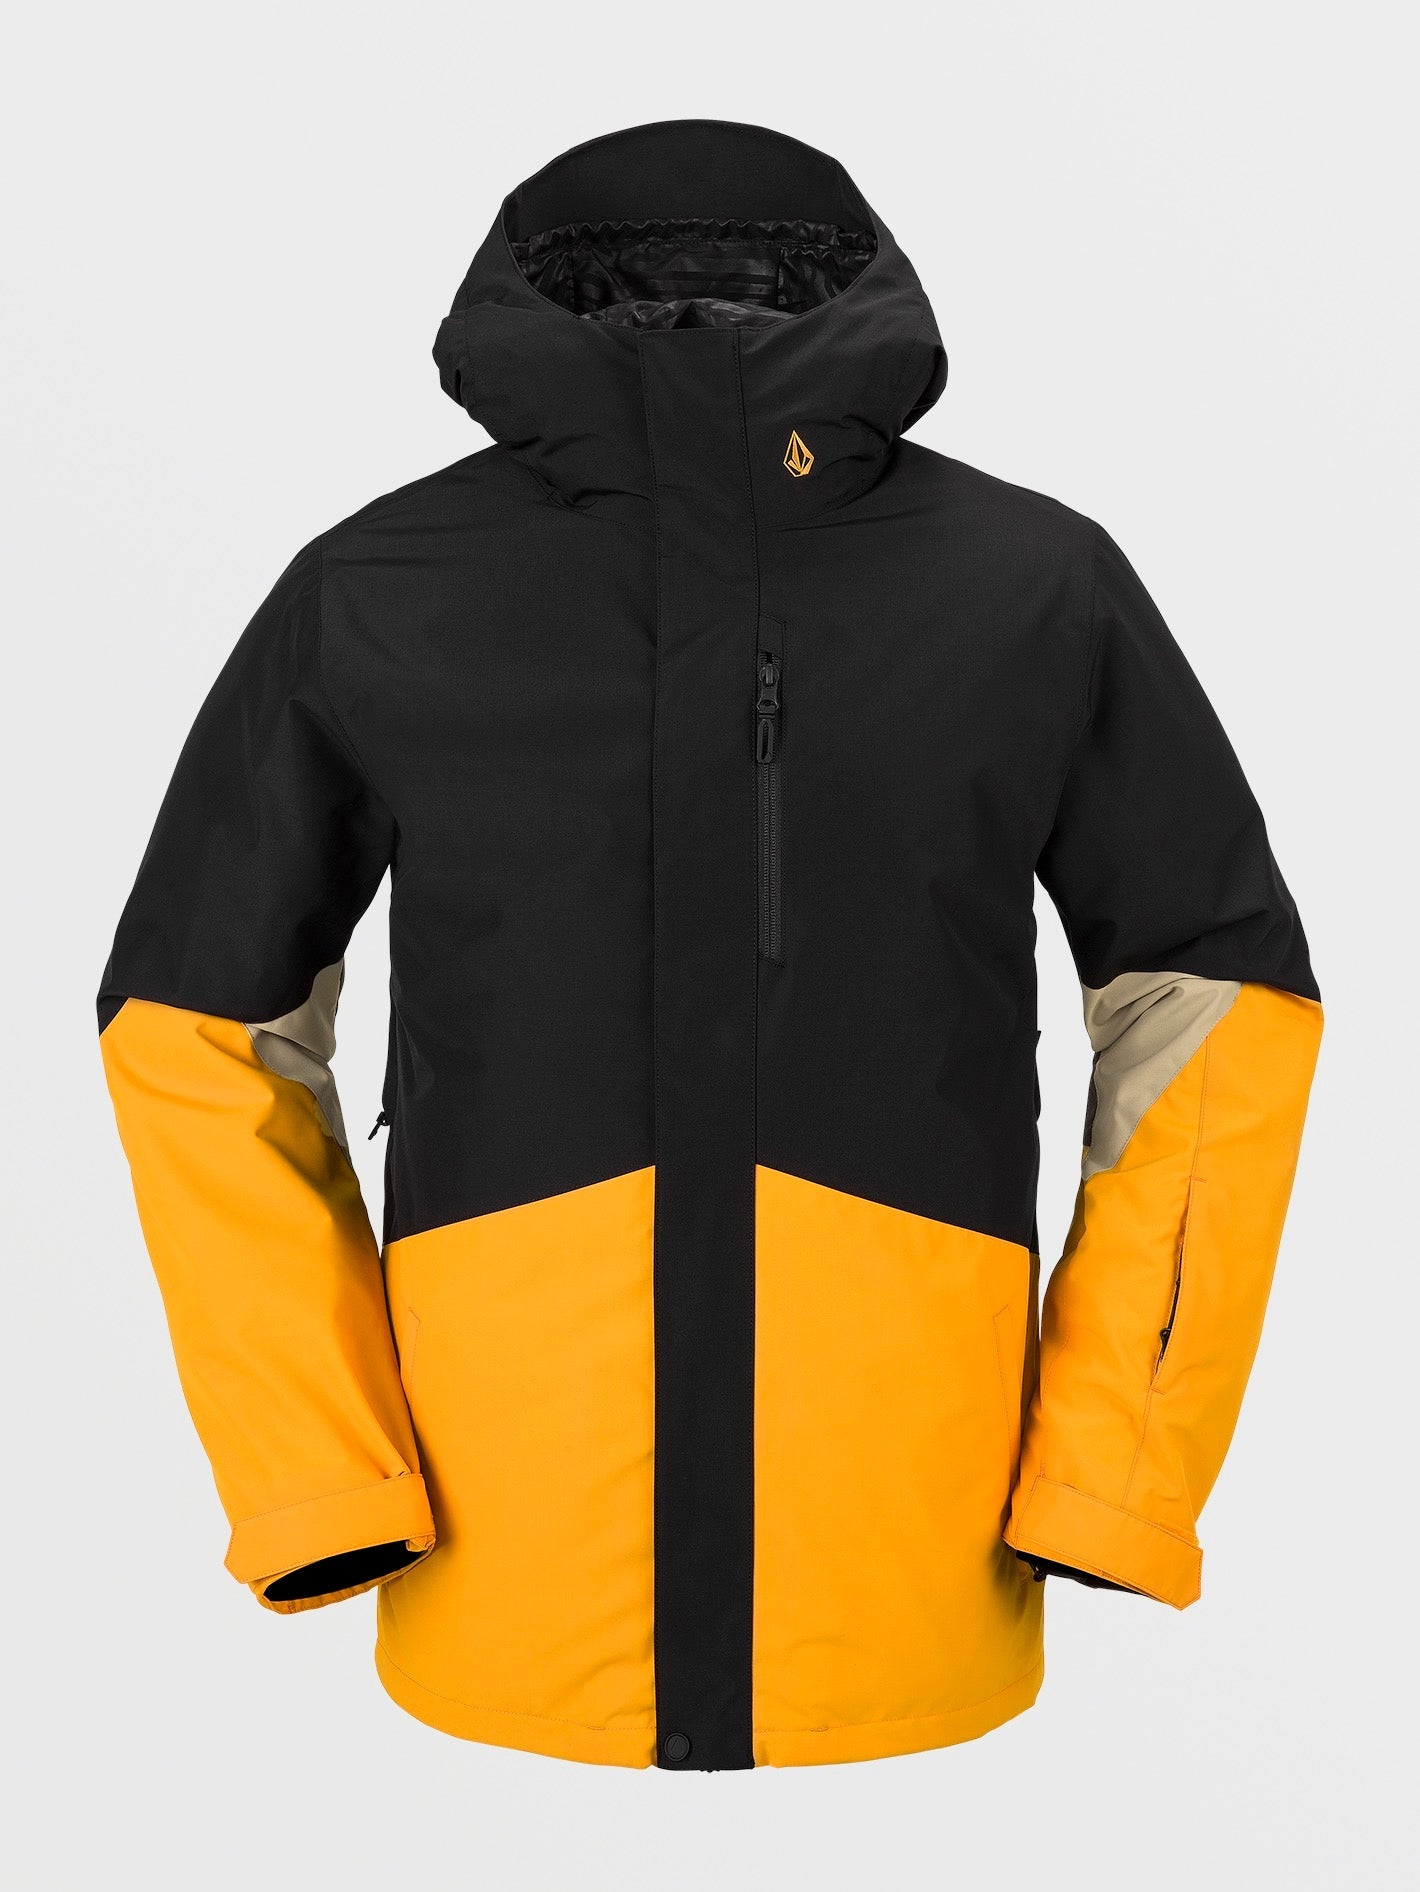 Mens Vcolp Jacket